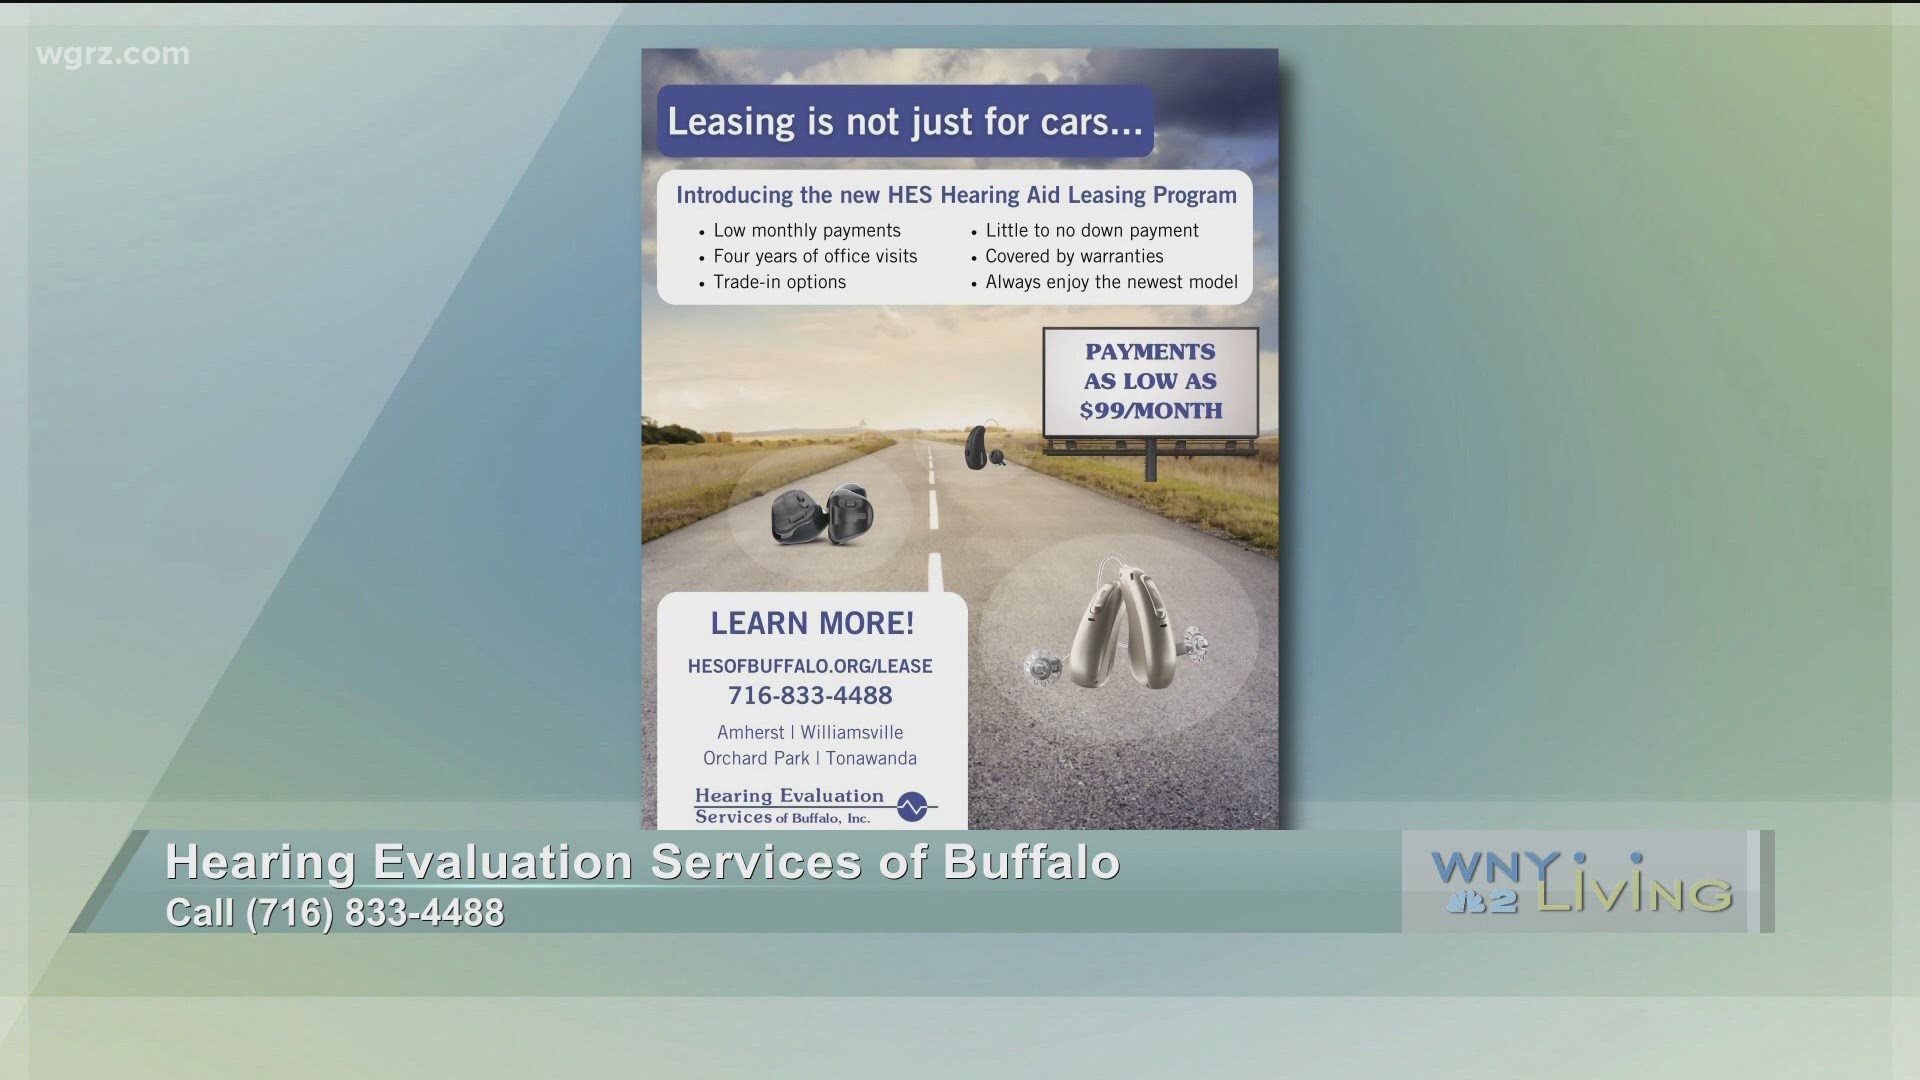 WNY Living - December 19 - Hearing Evaluation Services of Buffalo (THIS VIDEO IS SPONSORED BY HEARING EVALUATION SERVICES OF BUFFALO)